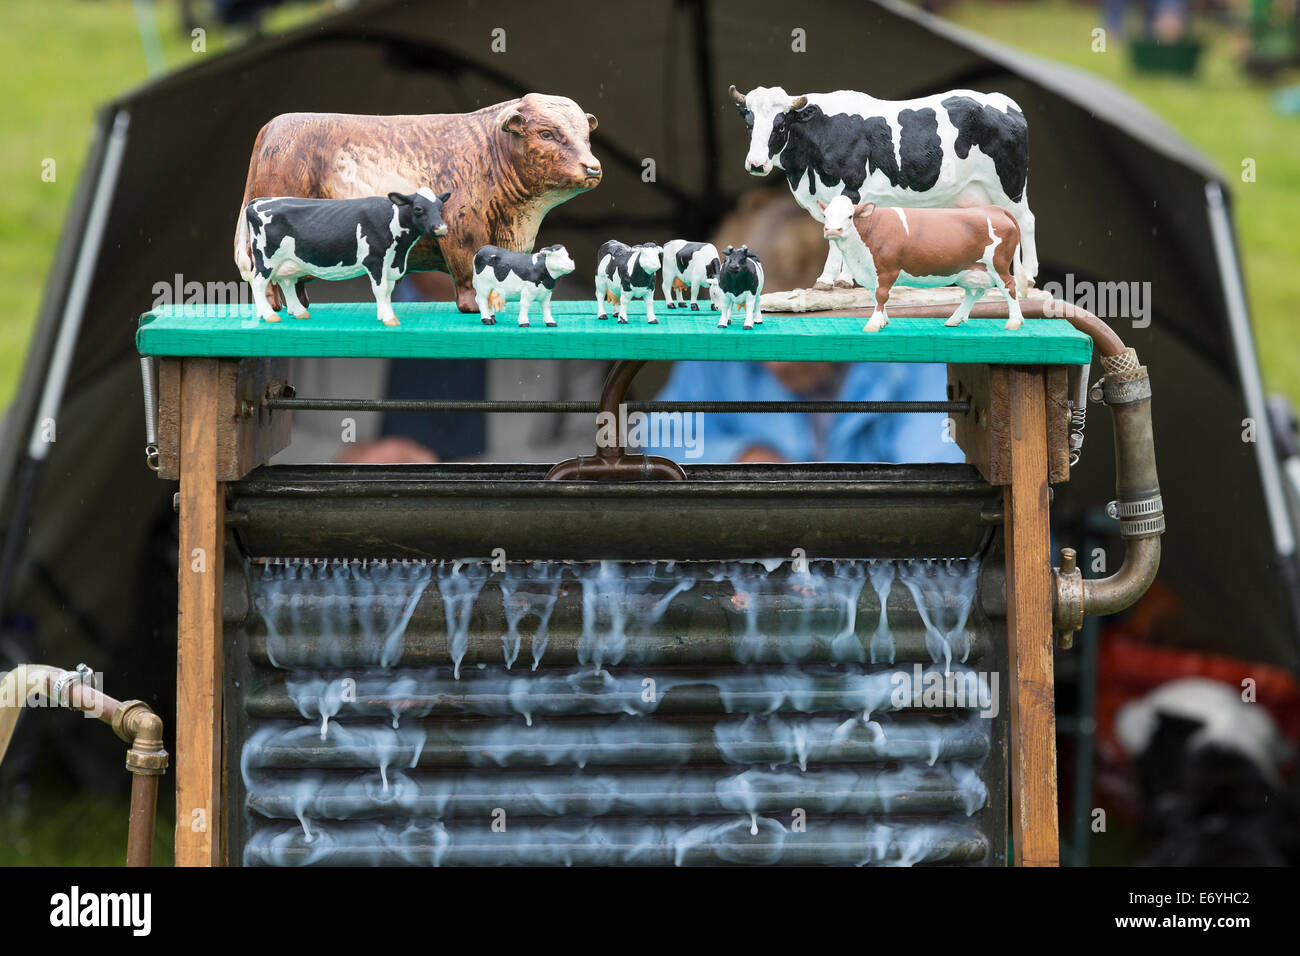 Early 20th century milk cooler demonstrated at the Aylsham Agricultural Show, Norfolk, UK. Stock Photo